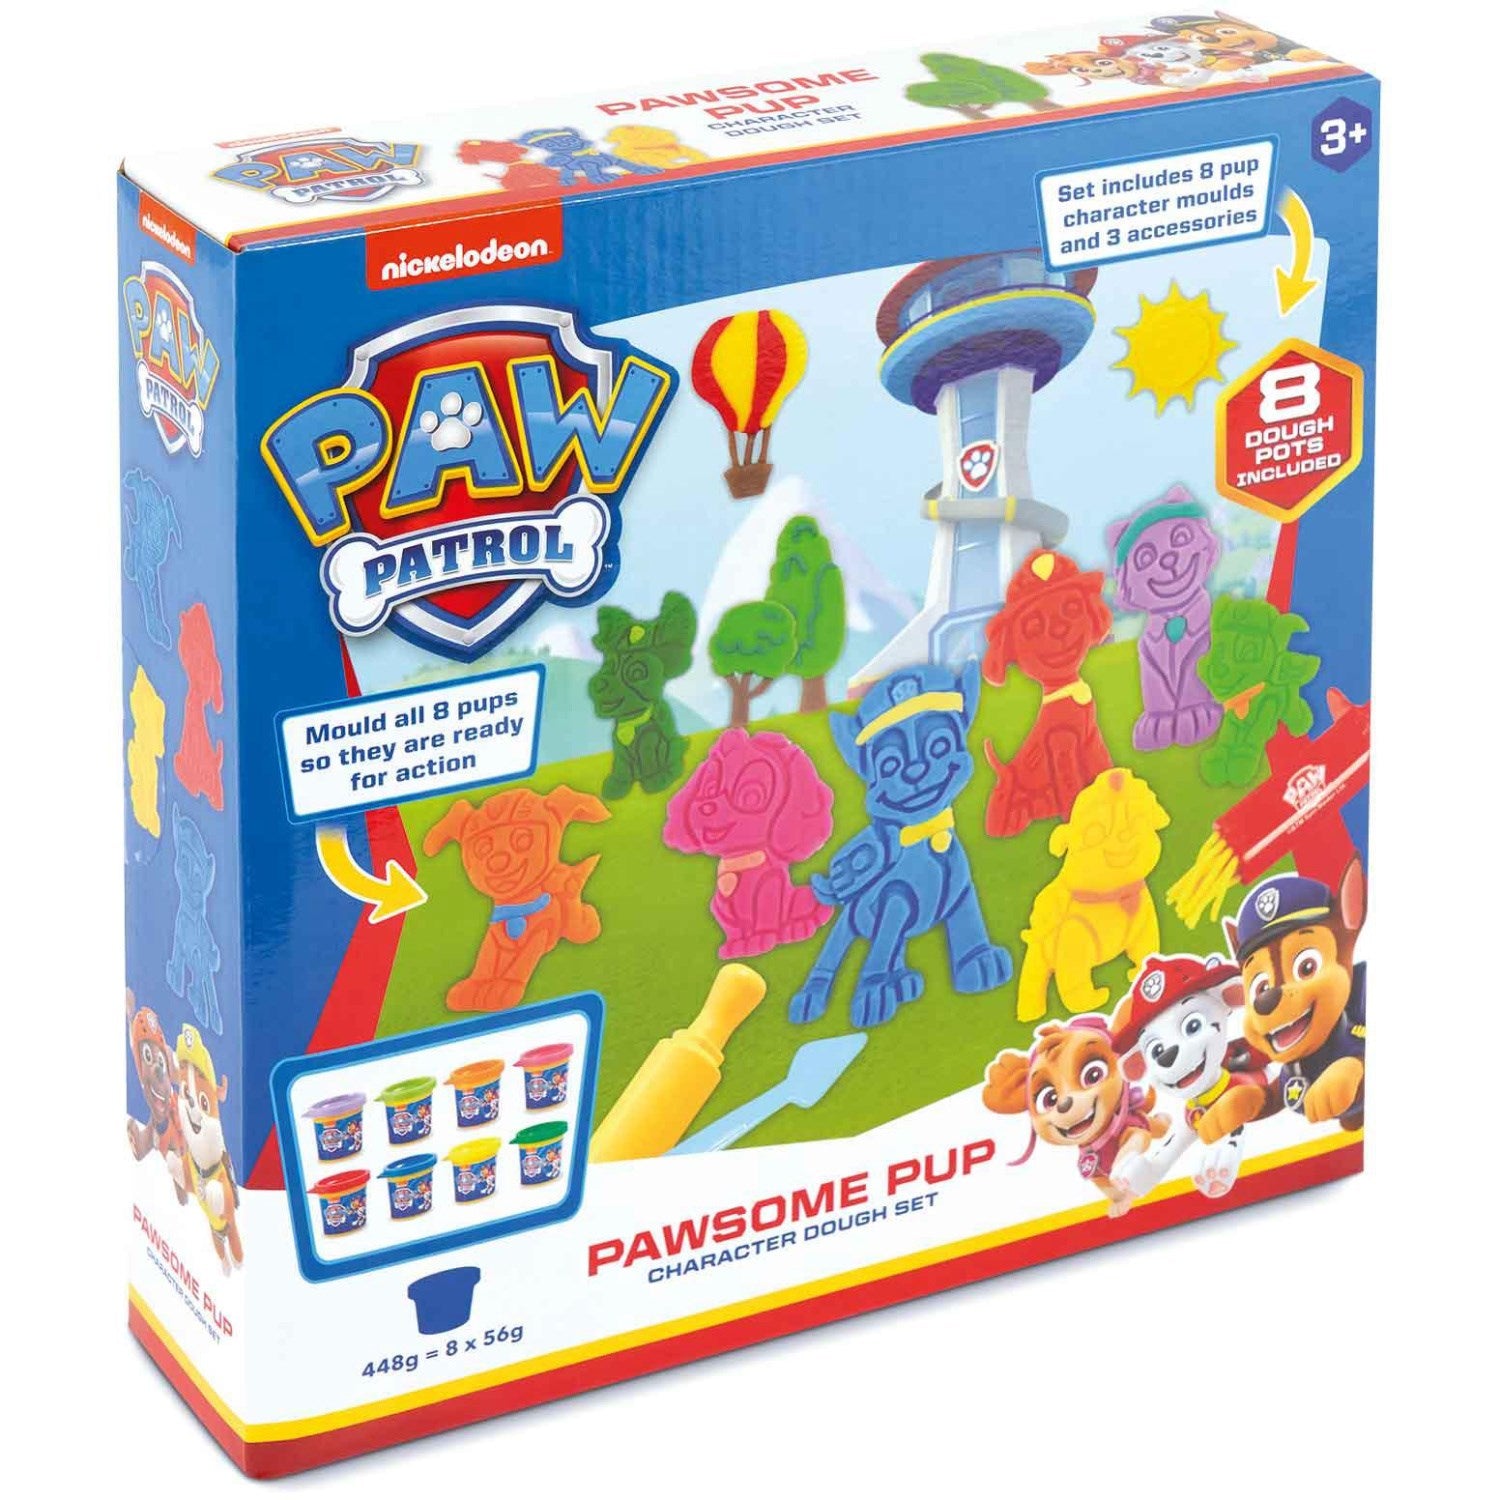 Paw Patrol Pawsome Pup Character Modellering Voks Playset 5